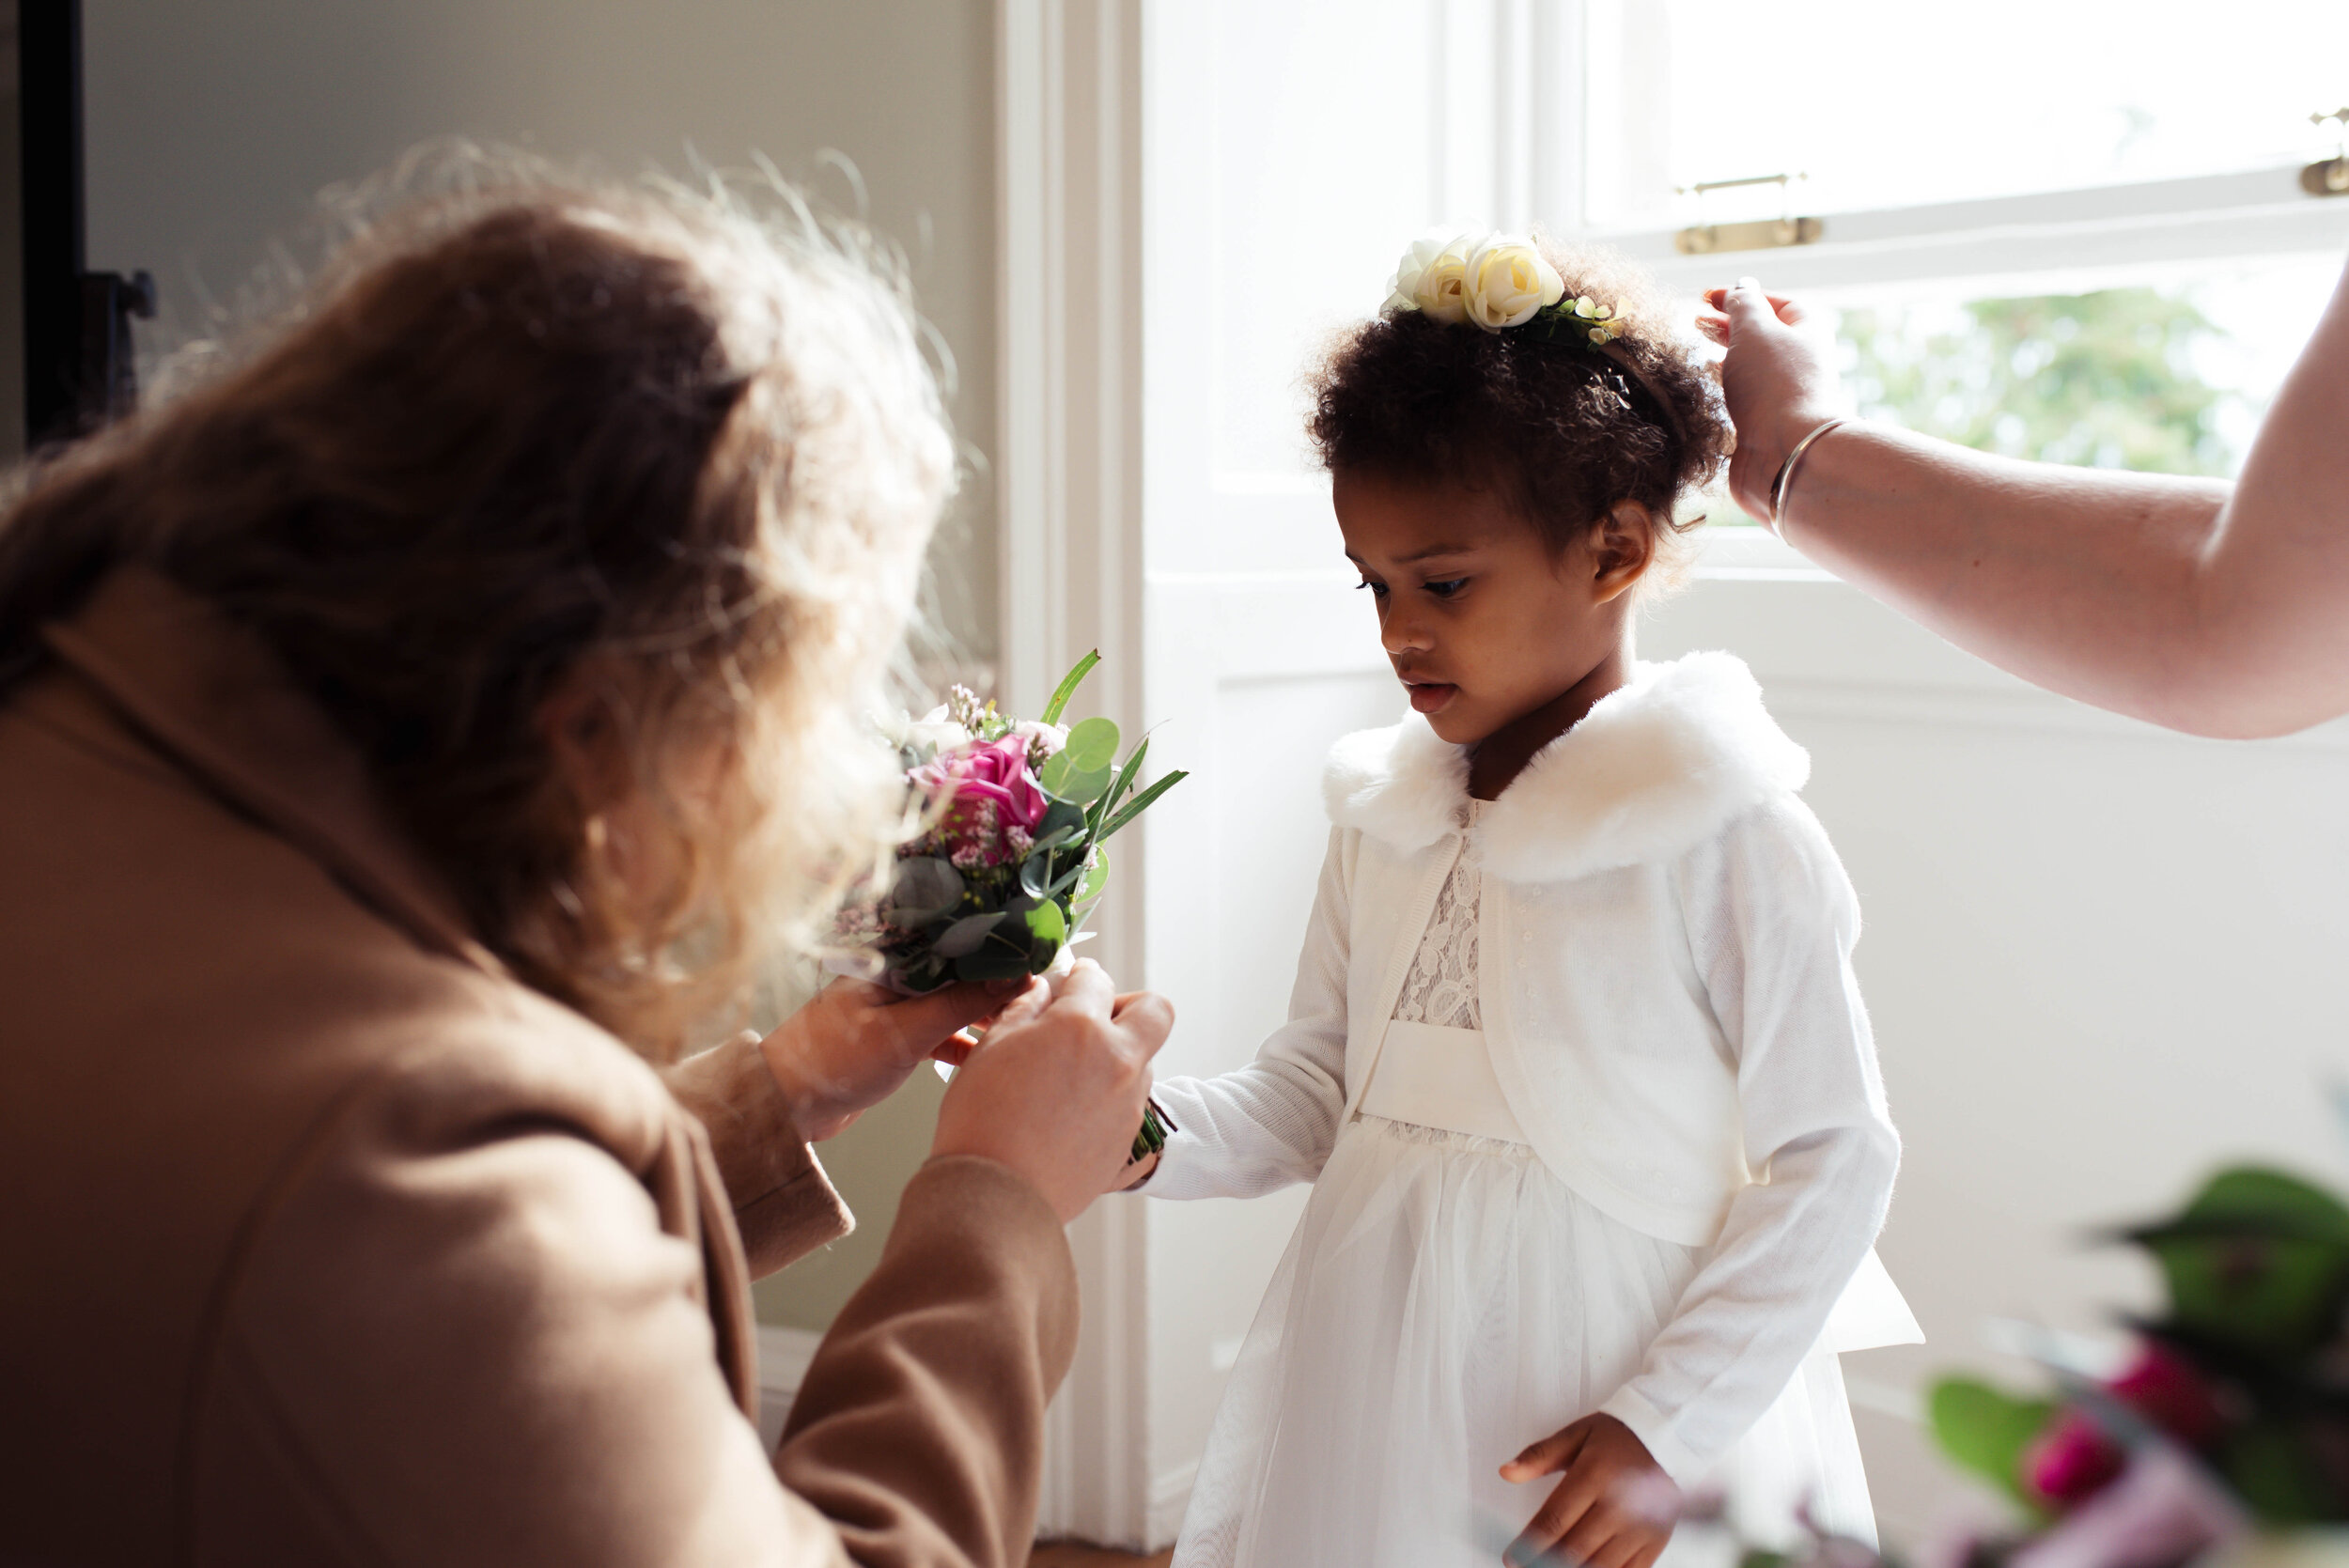 Flower girl gets given her bouquet